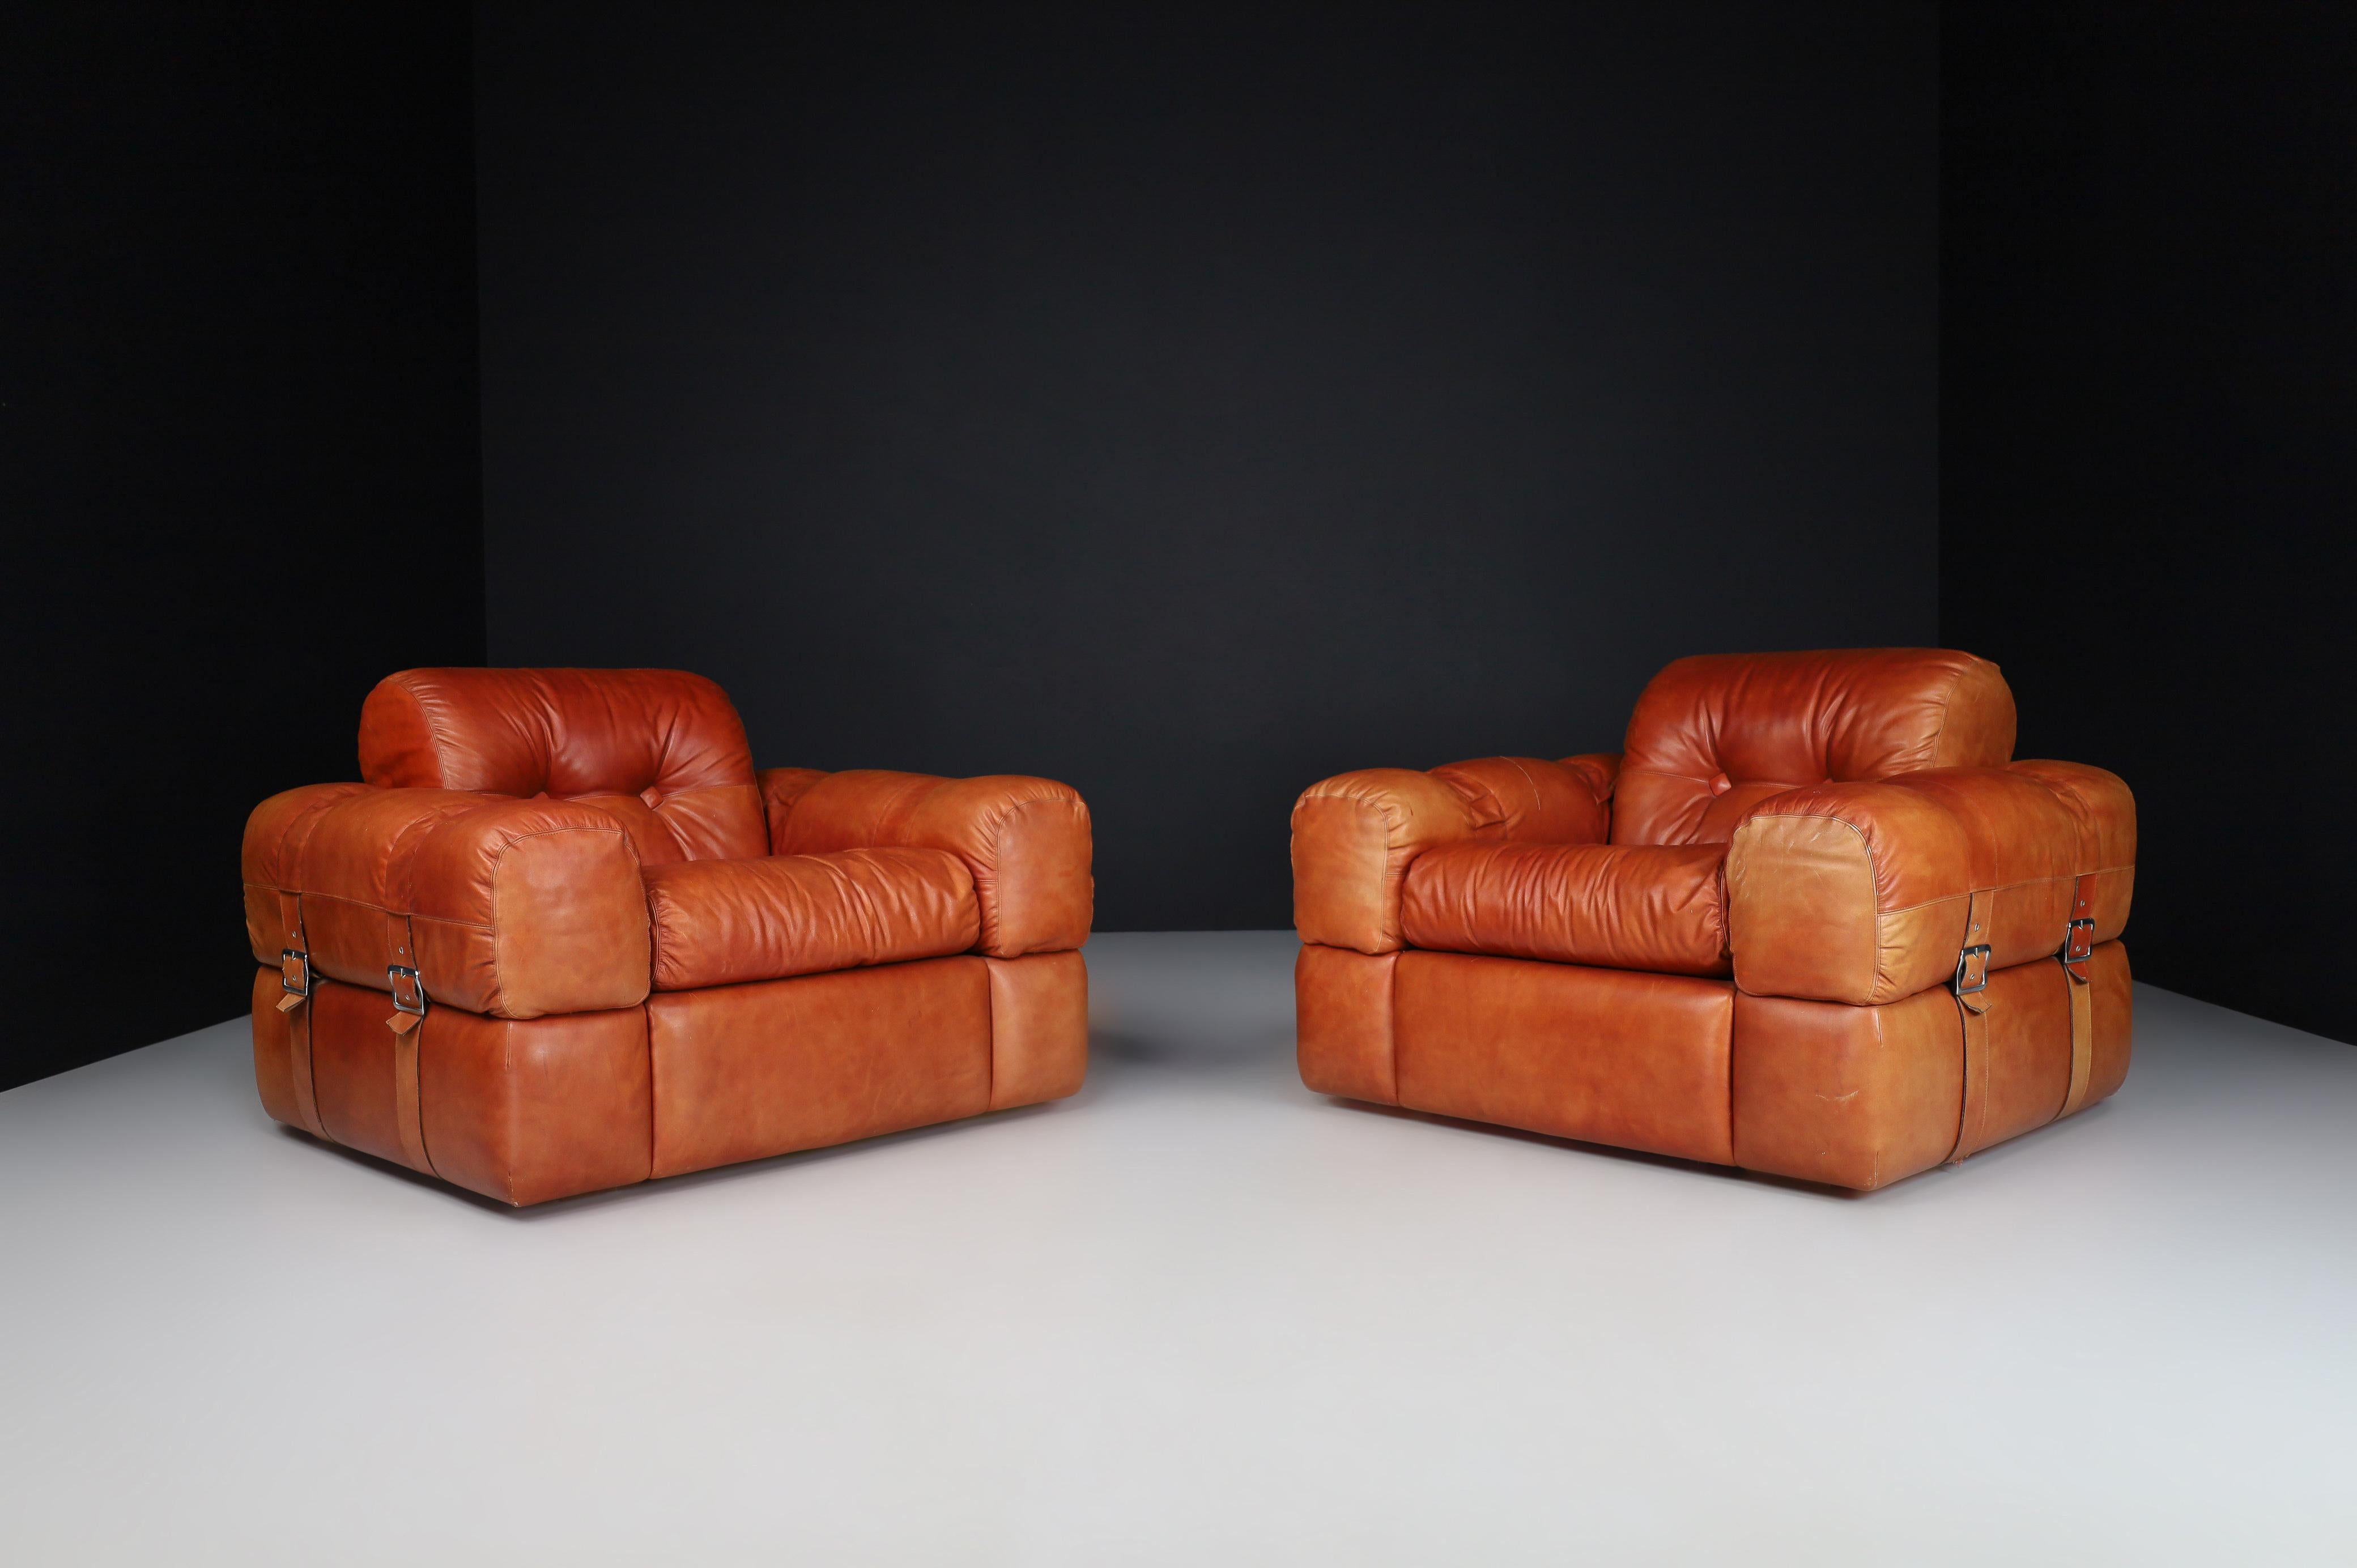 A couple of Lounge Chairs in Patinated Cognac Leather, Italy 1970

A couple of oversized, large, modern lounge armchairs that feature straith lines and shapes invite you to take a seat and relax—designed in Italy in the 1970s. Generously